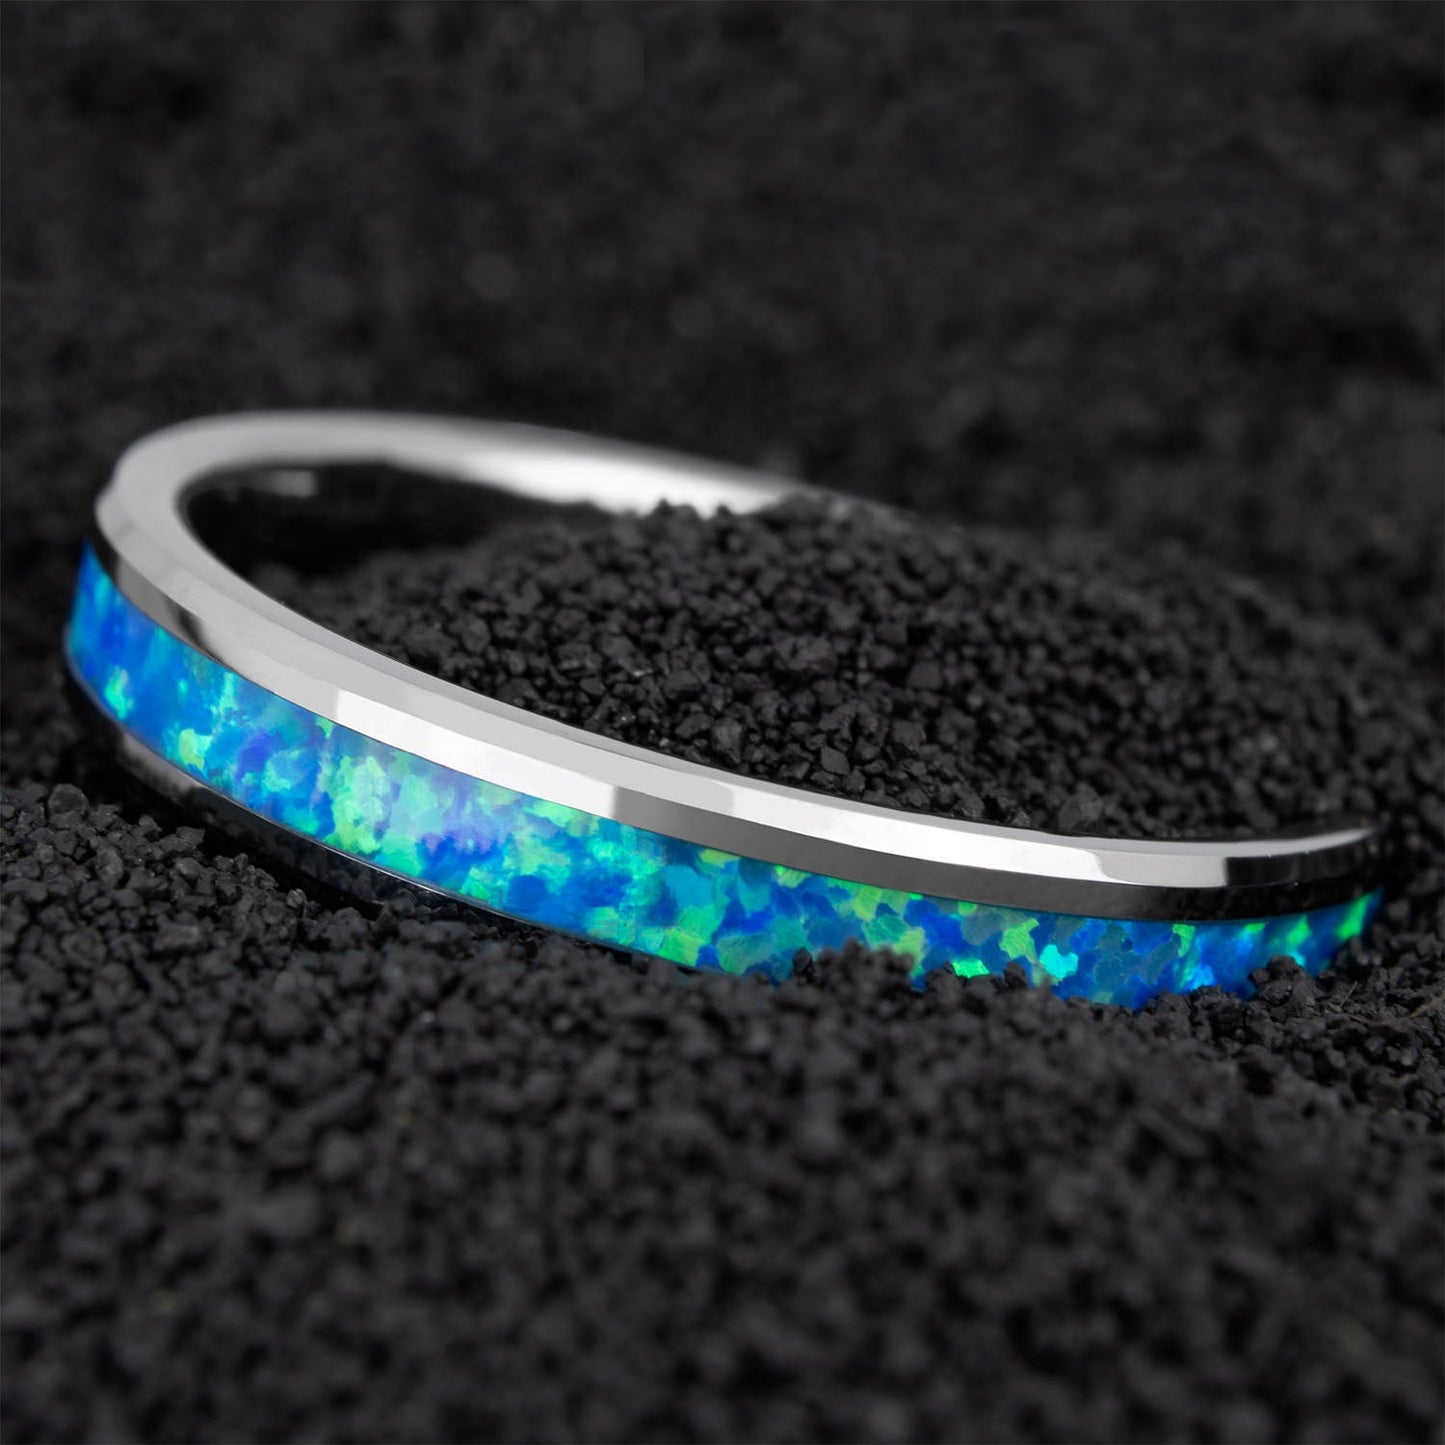 Tungsten Women's Wedding Band with Blue & Green Opal Inlay